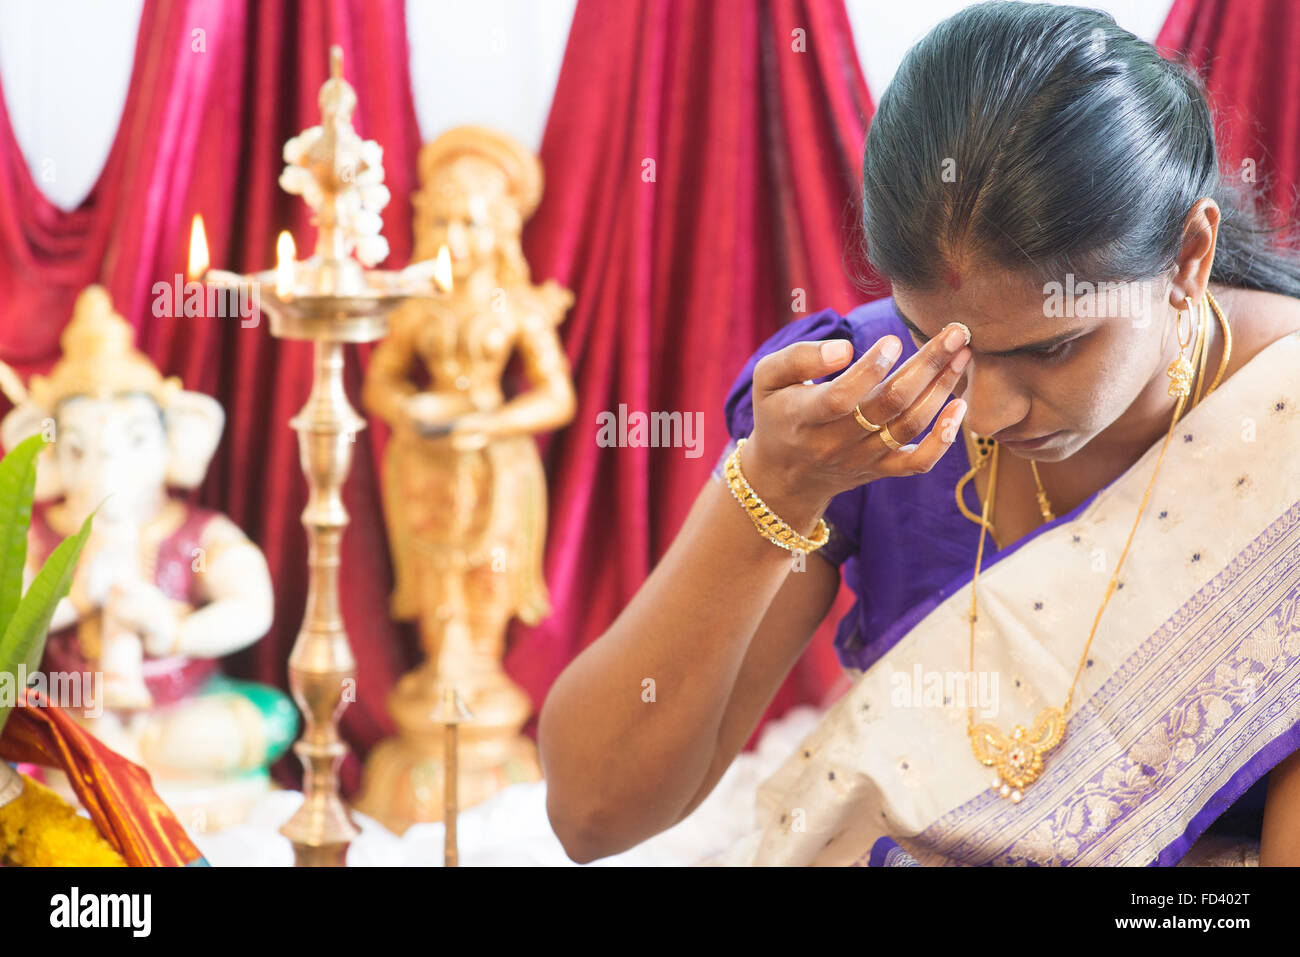 Hindu woman putting bindi or marking on her forehead during Indian traditional religious rituals, the tradition of Hinduism. Stock Photo